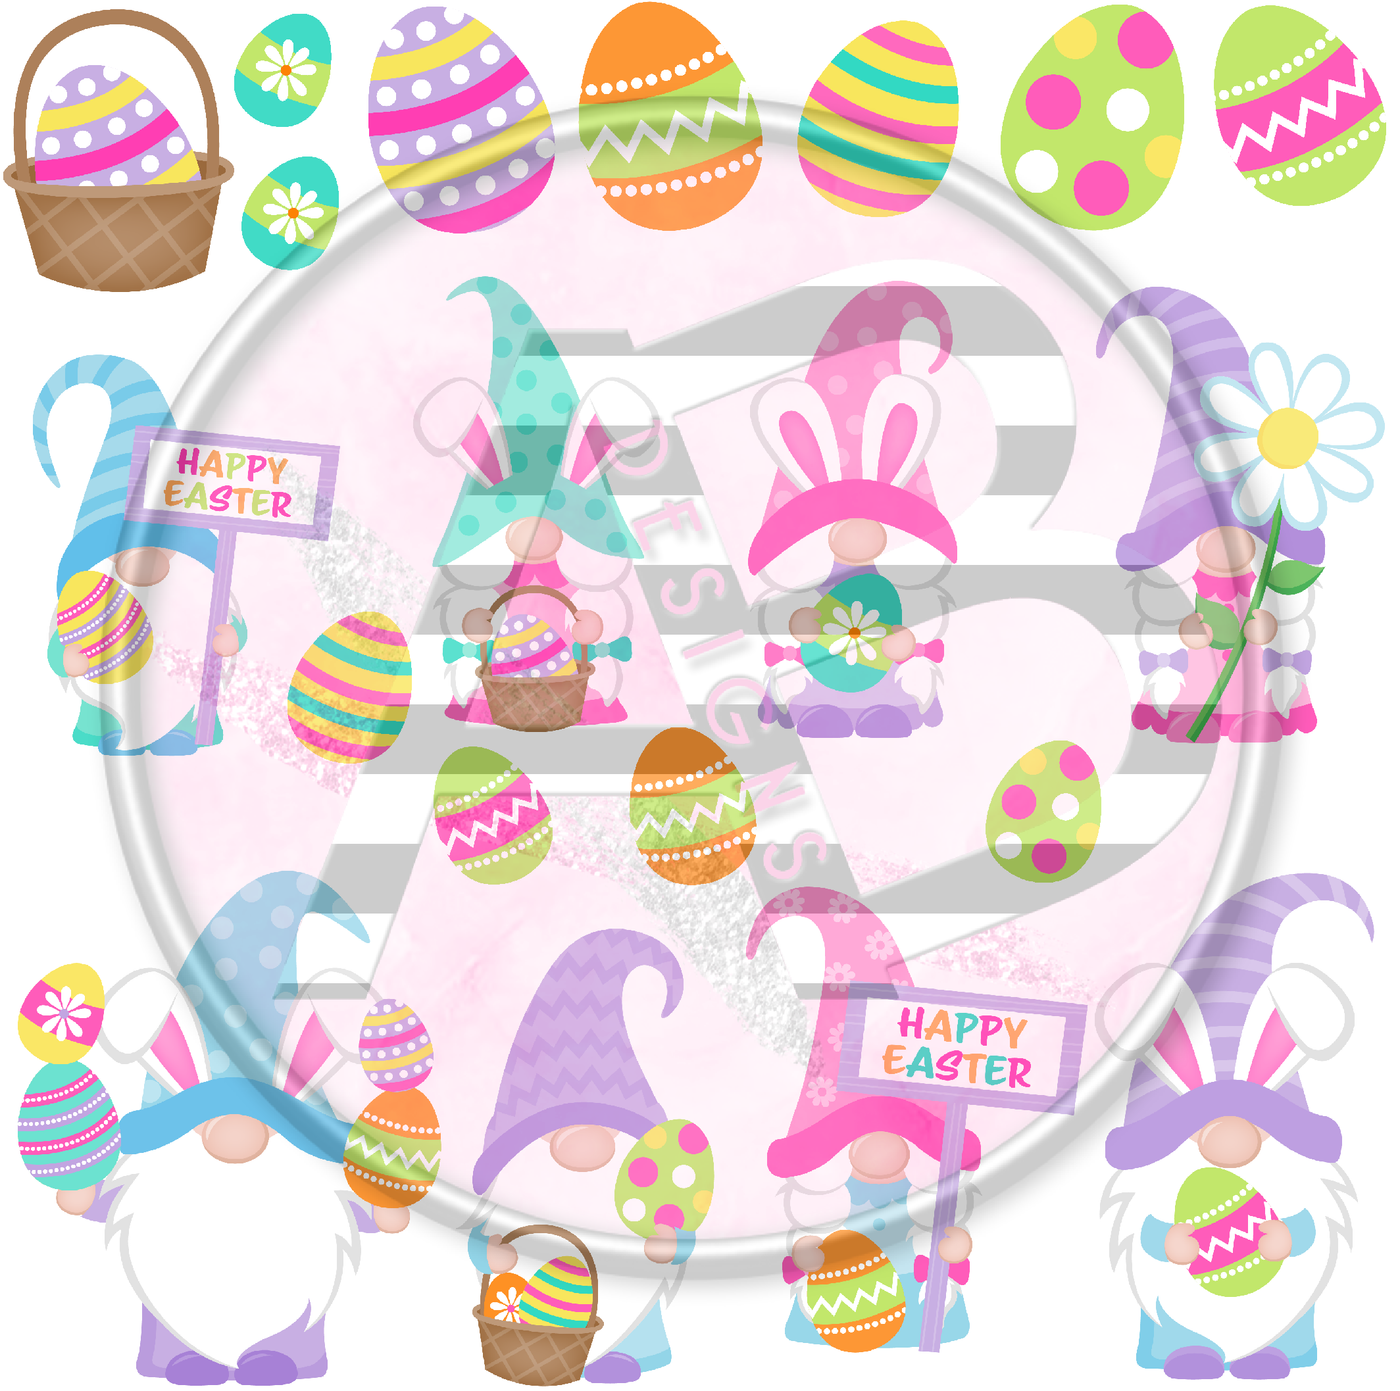 Adhesive Patterned Vinyl - Easter Gnomes 1 - 12 x 12 Clear Sheet